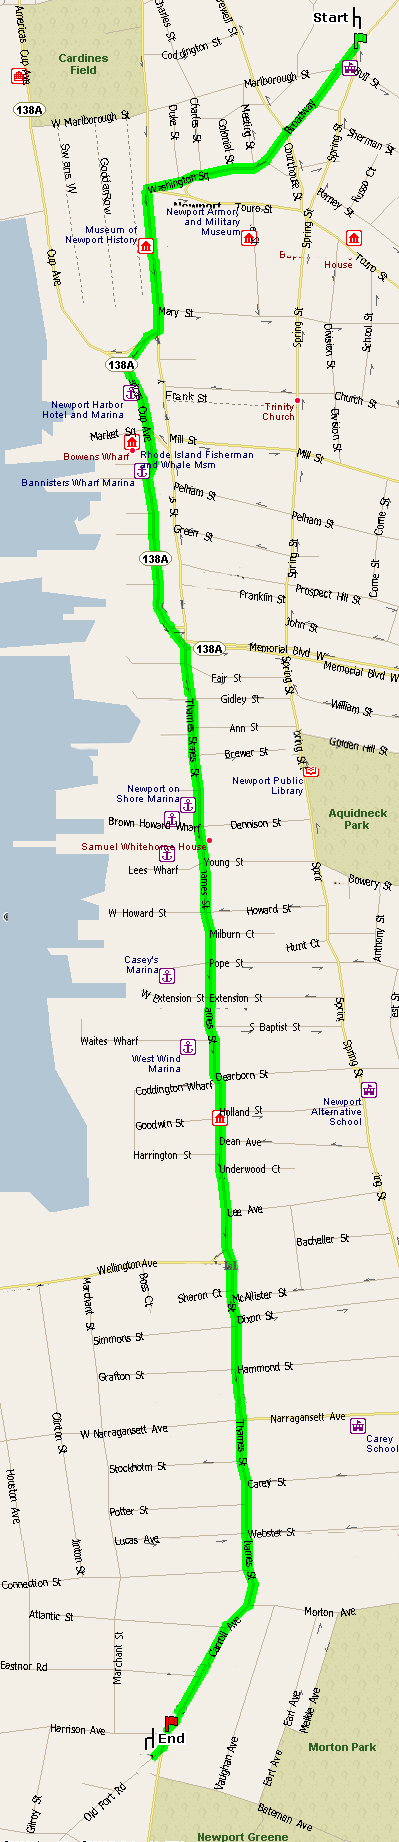 Newport St. Patrick's Day parade route